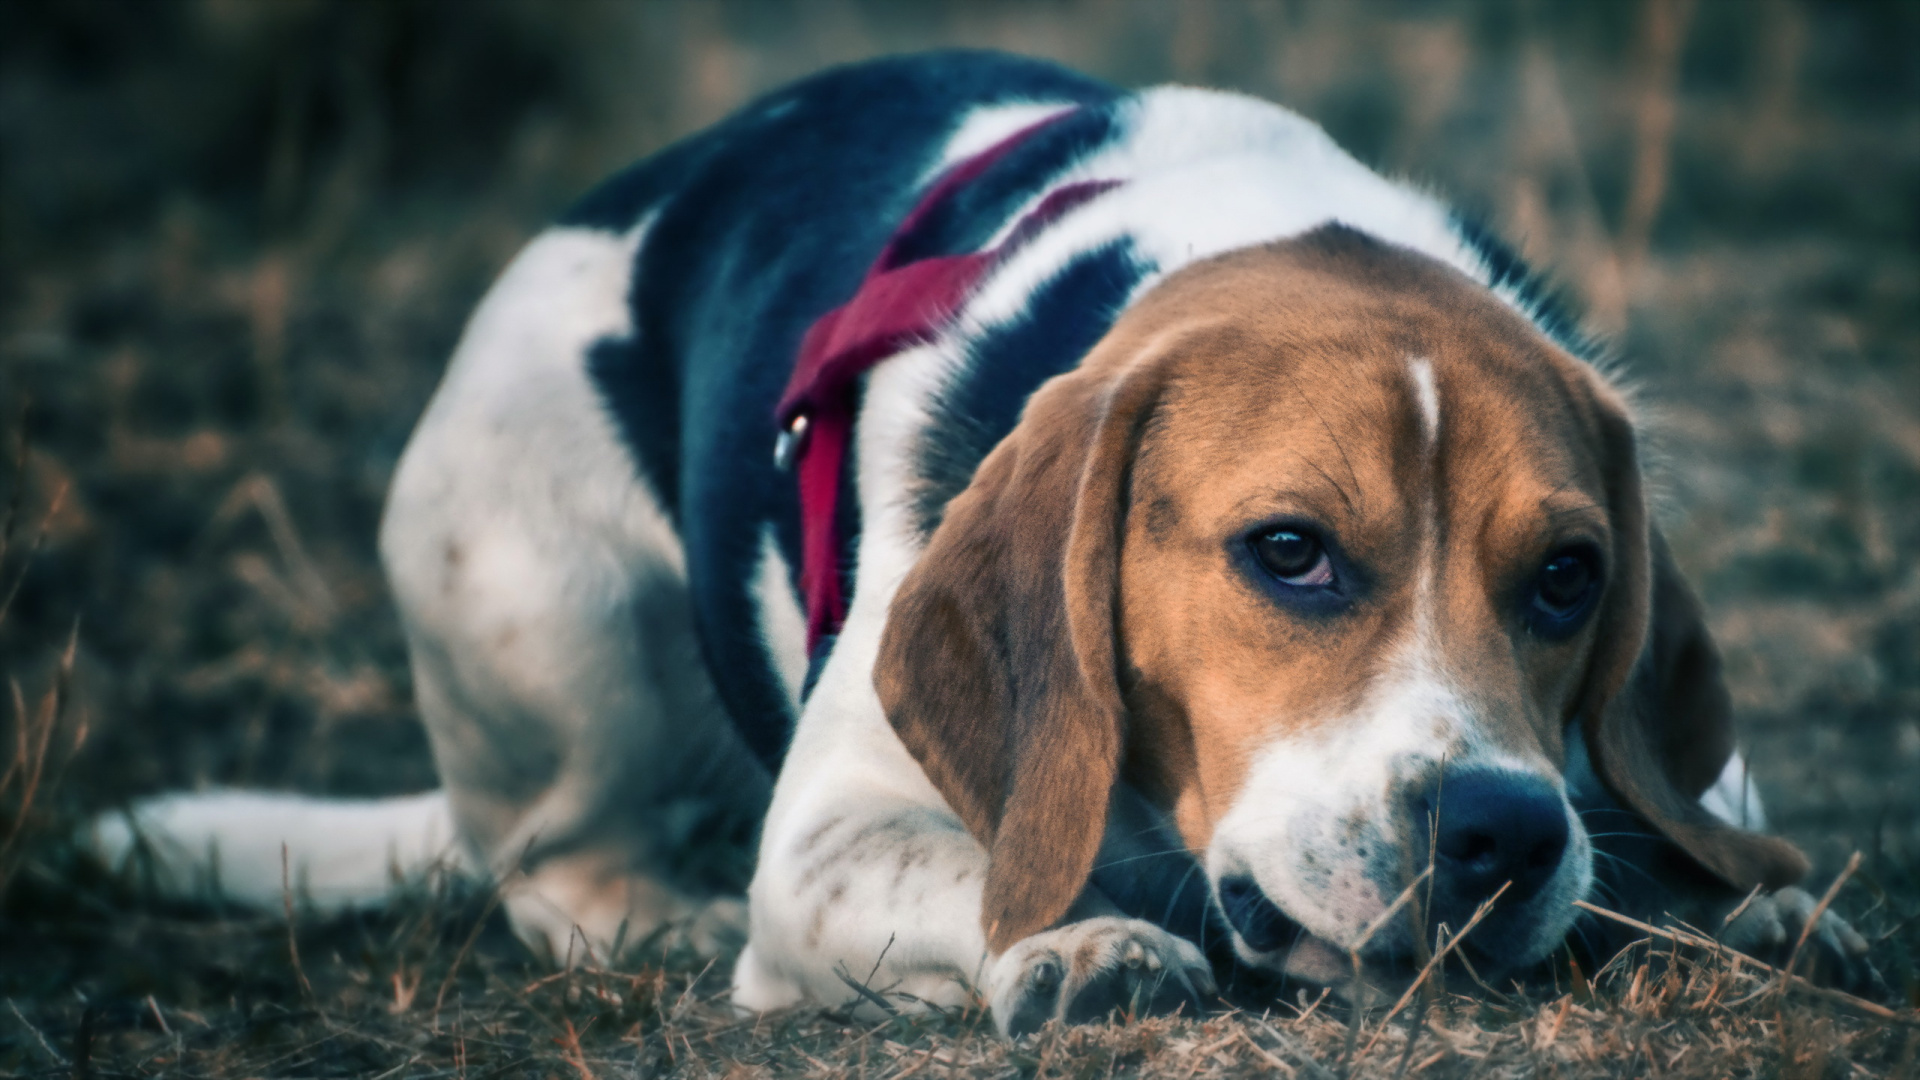 Tricolor Beagle Lying on Ground. Wallpaper in 1920x1080 Resolution